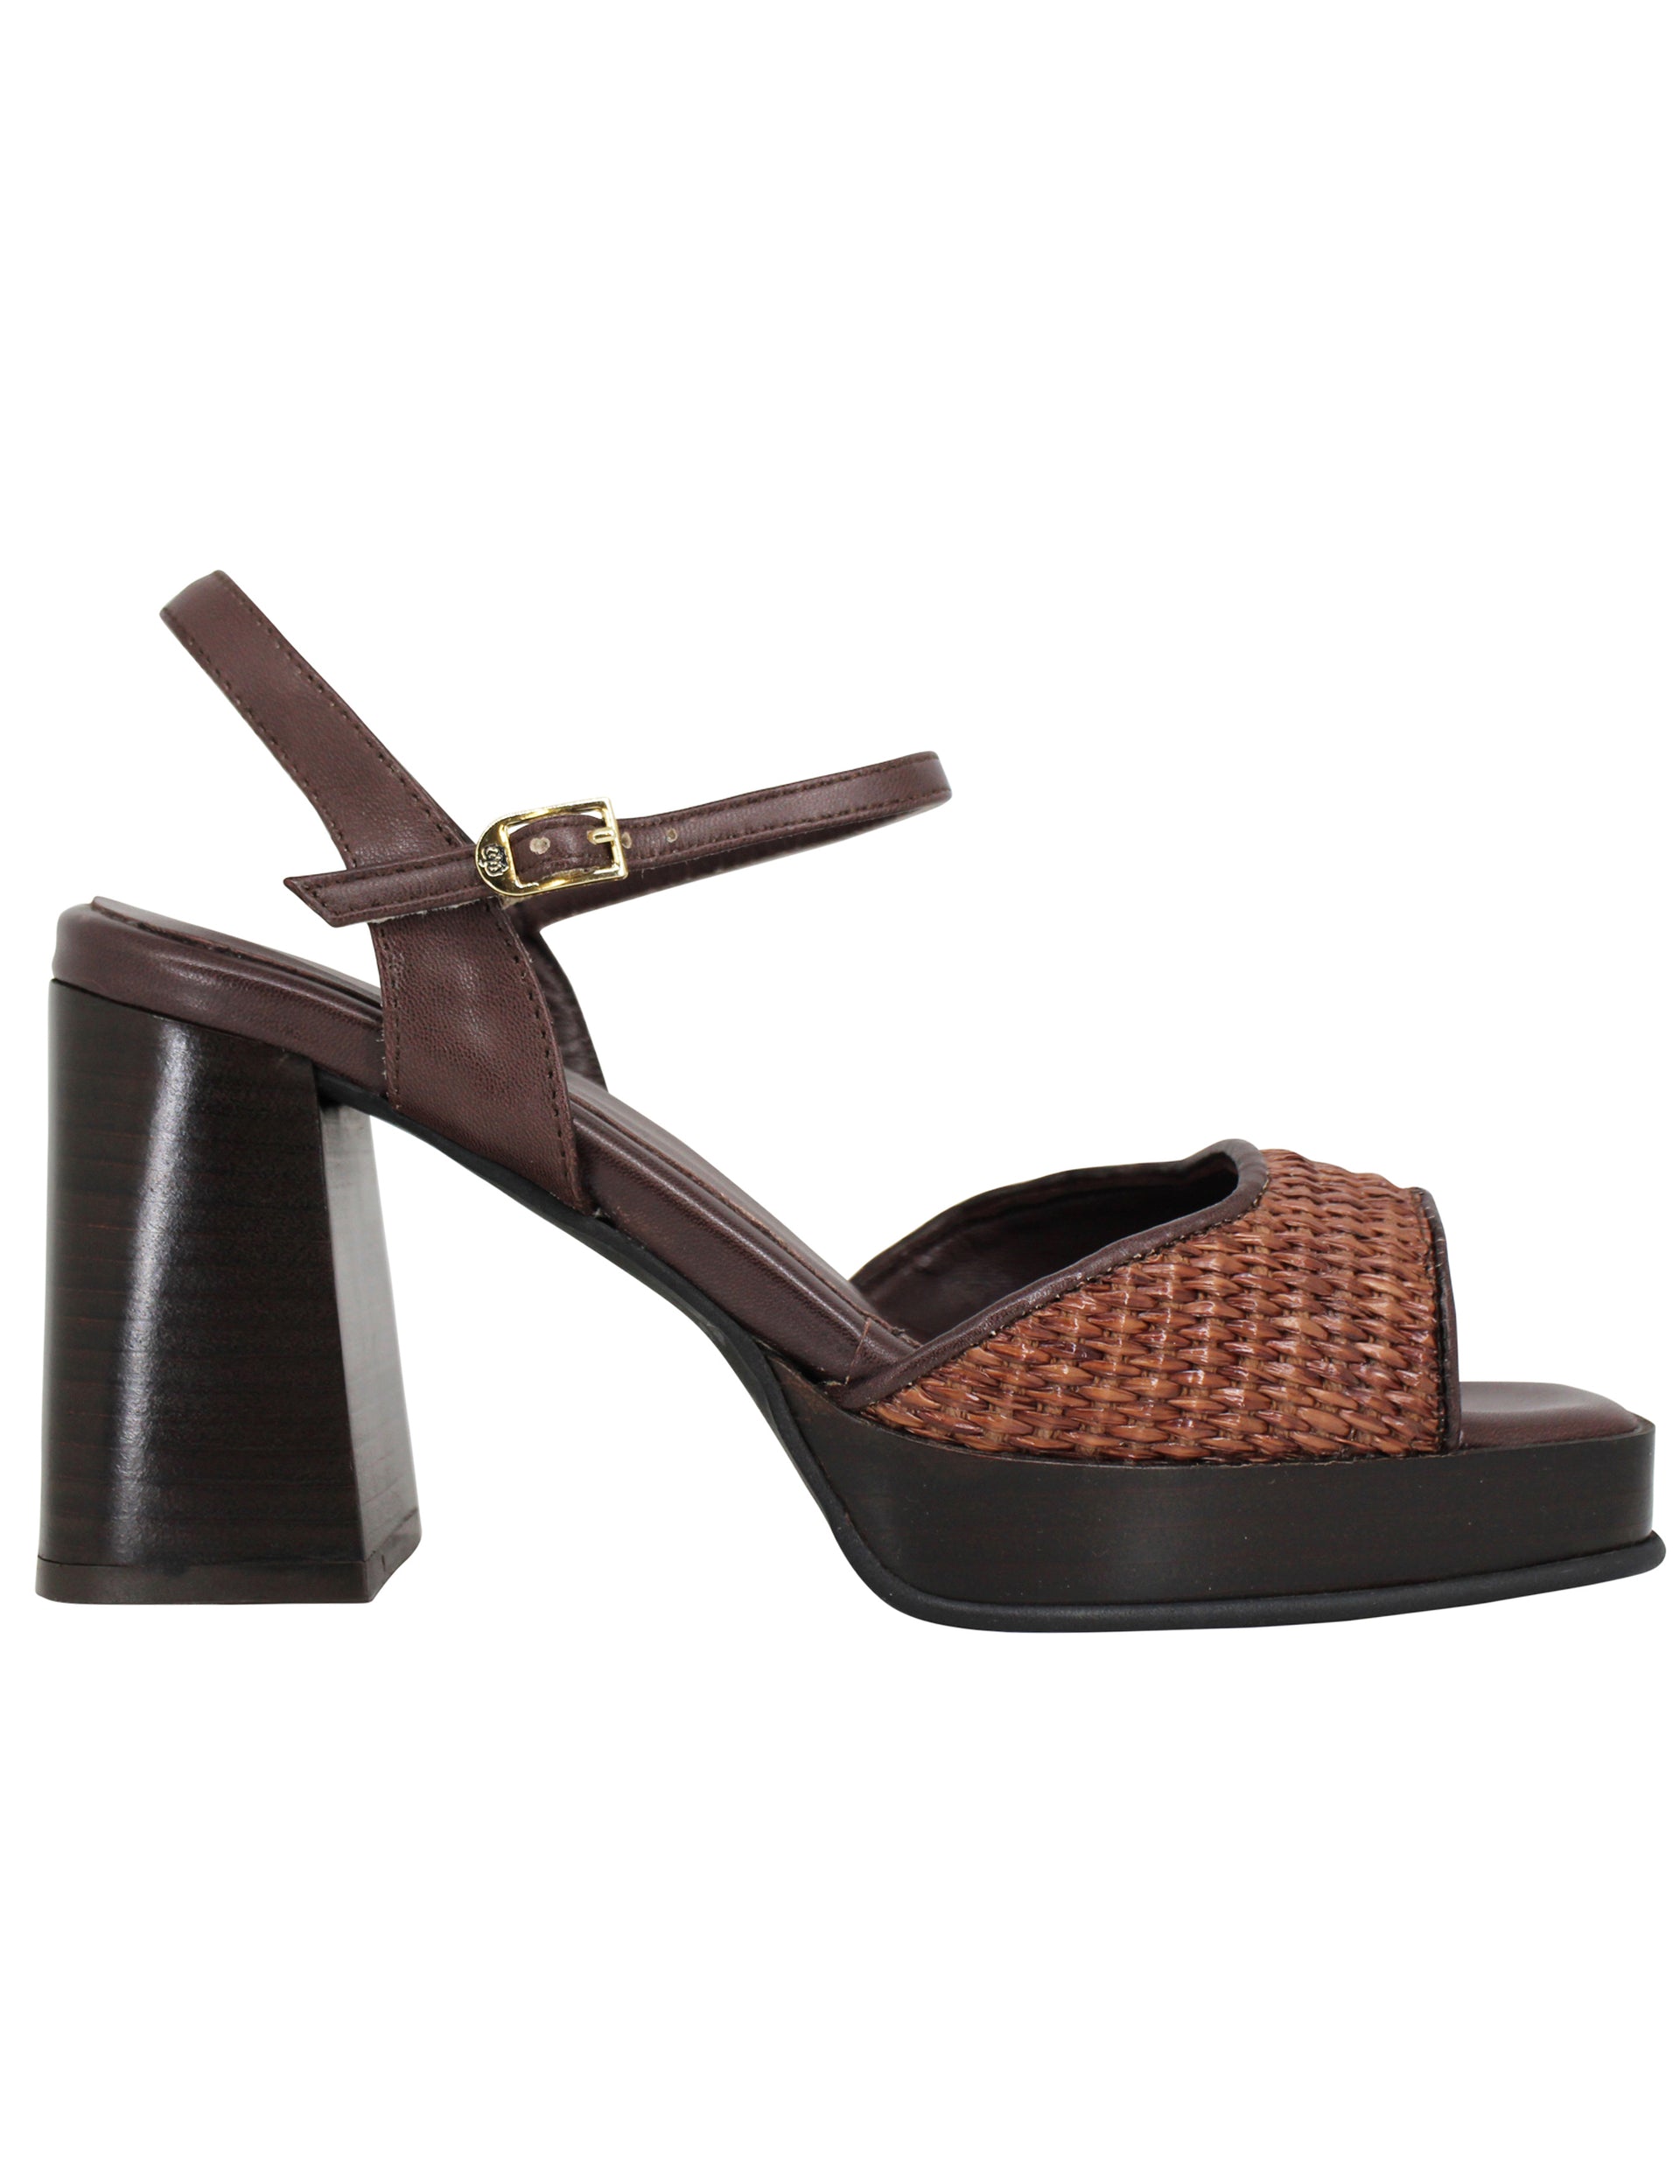 Women's sandals in brown leather and fabric with square toe heel and ankle strap